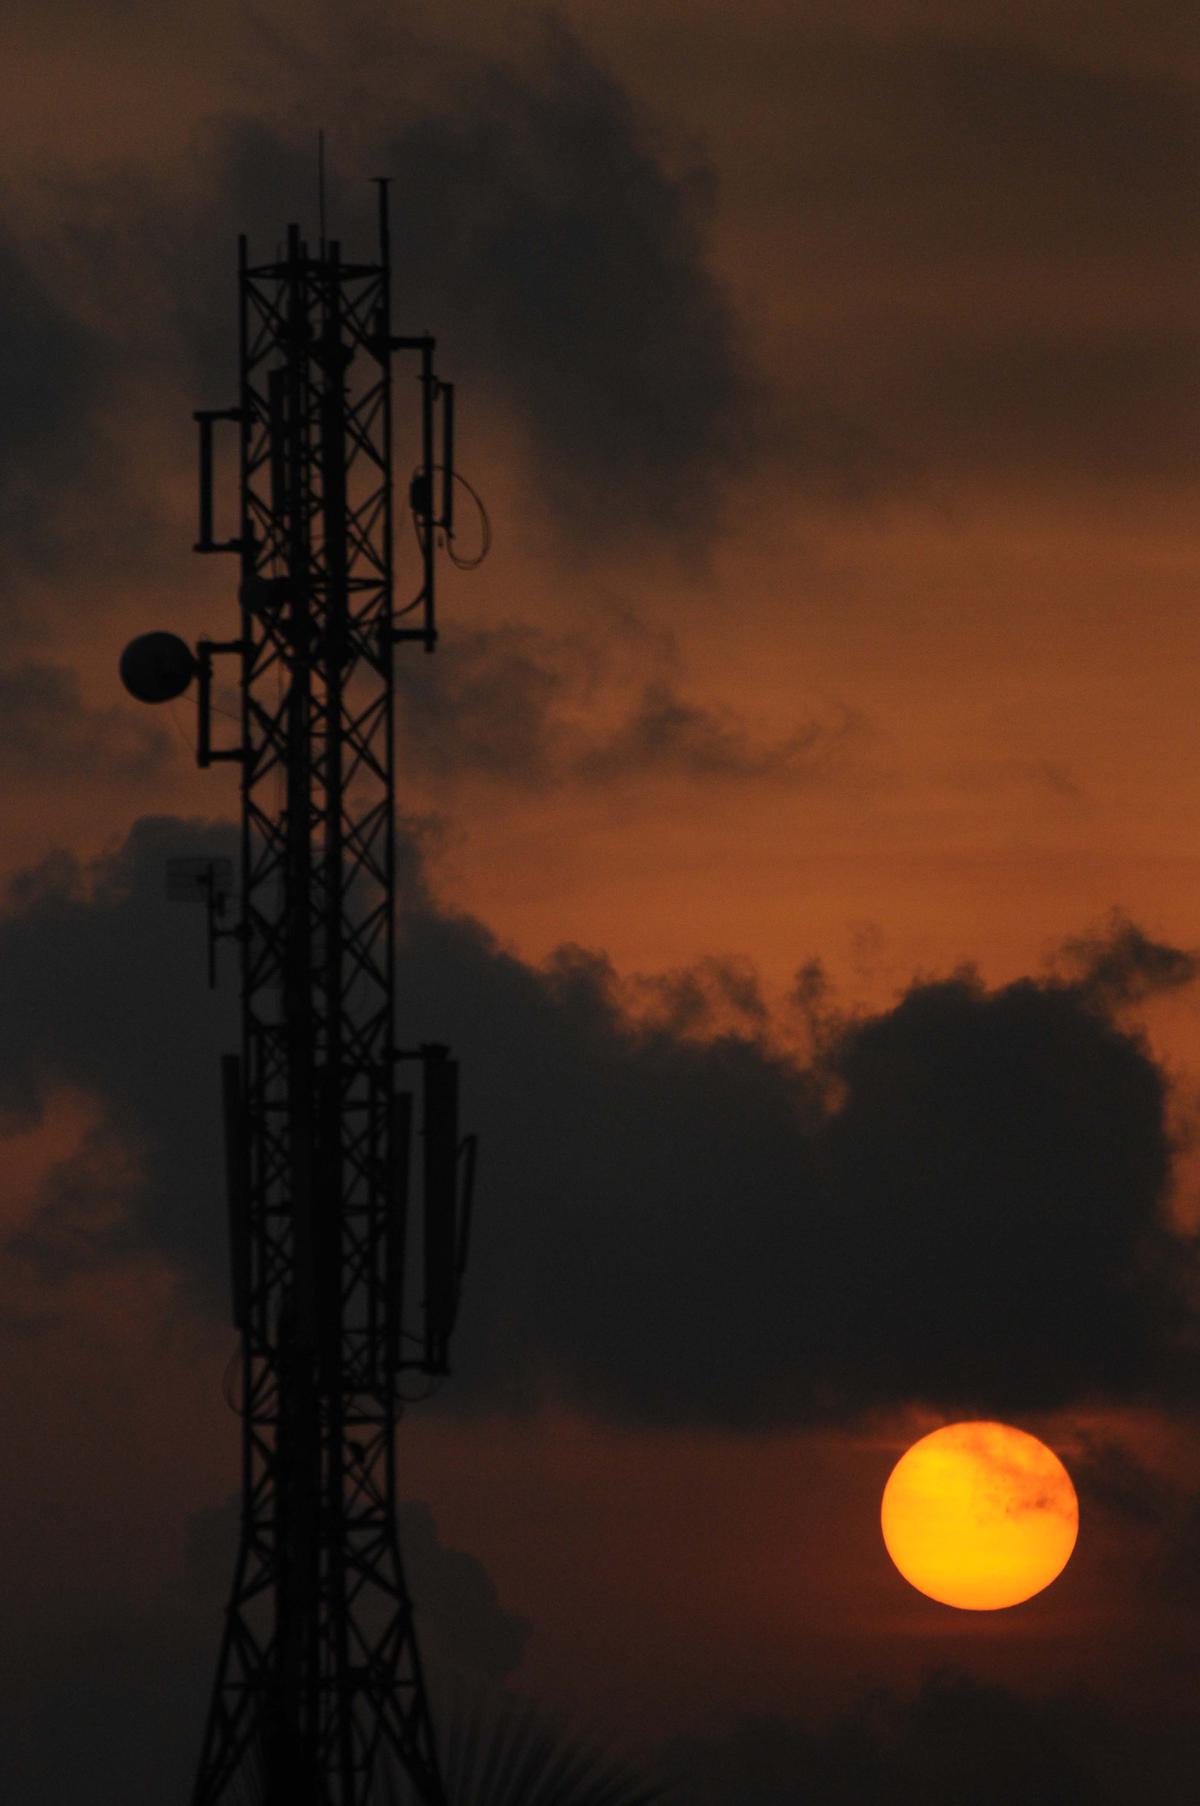 K-FON is expected to hasten the 4G/5G transition in Kerala by interconnecting Kerala’s 8000+ mobile towers